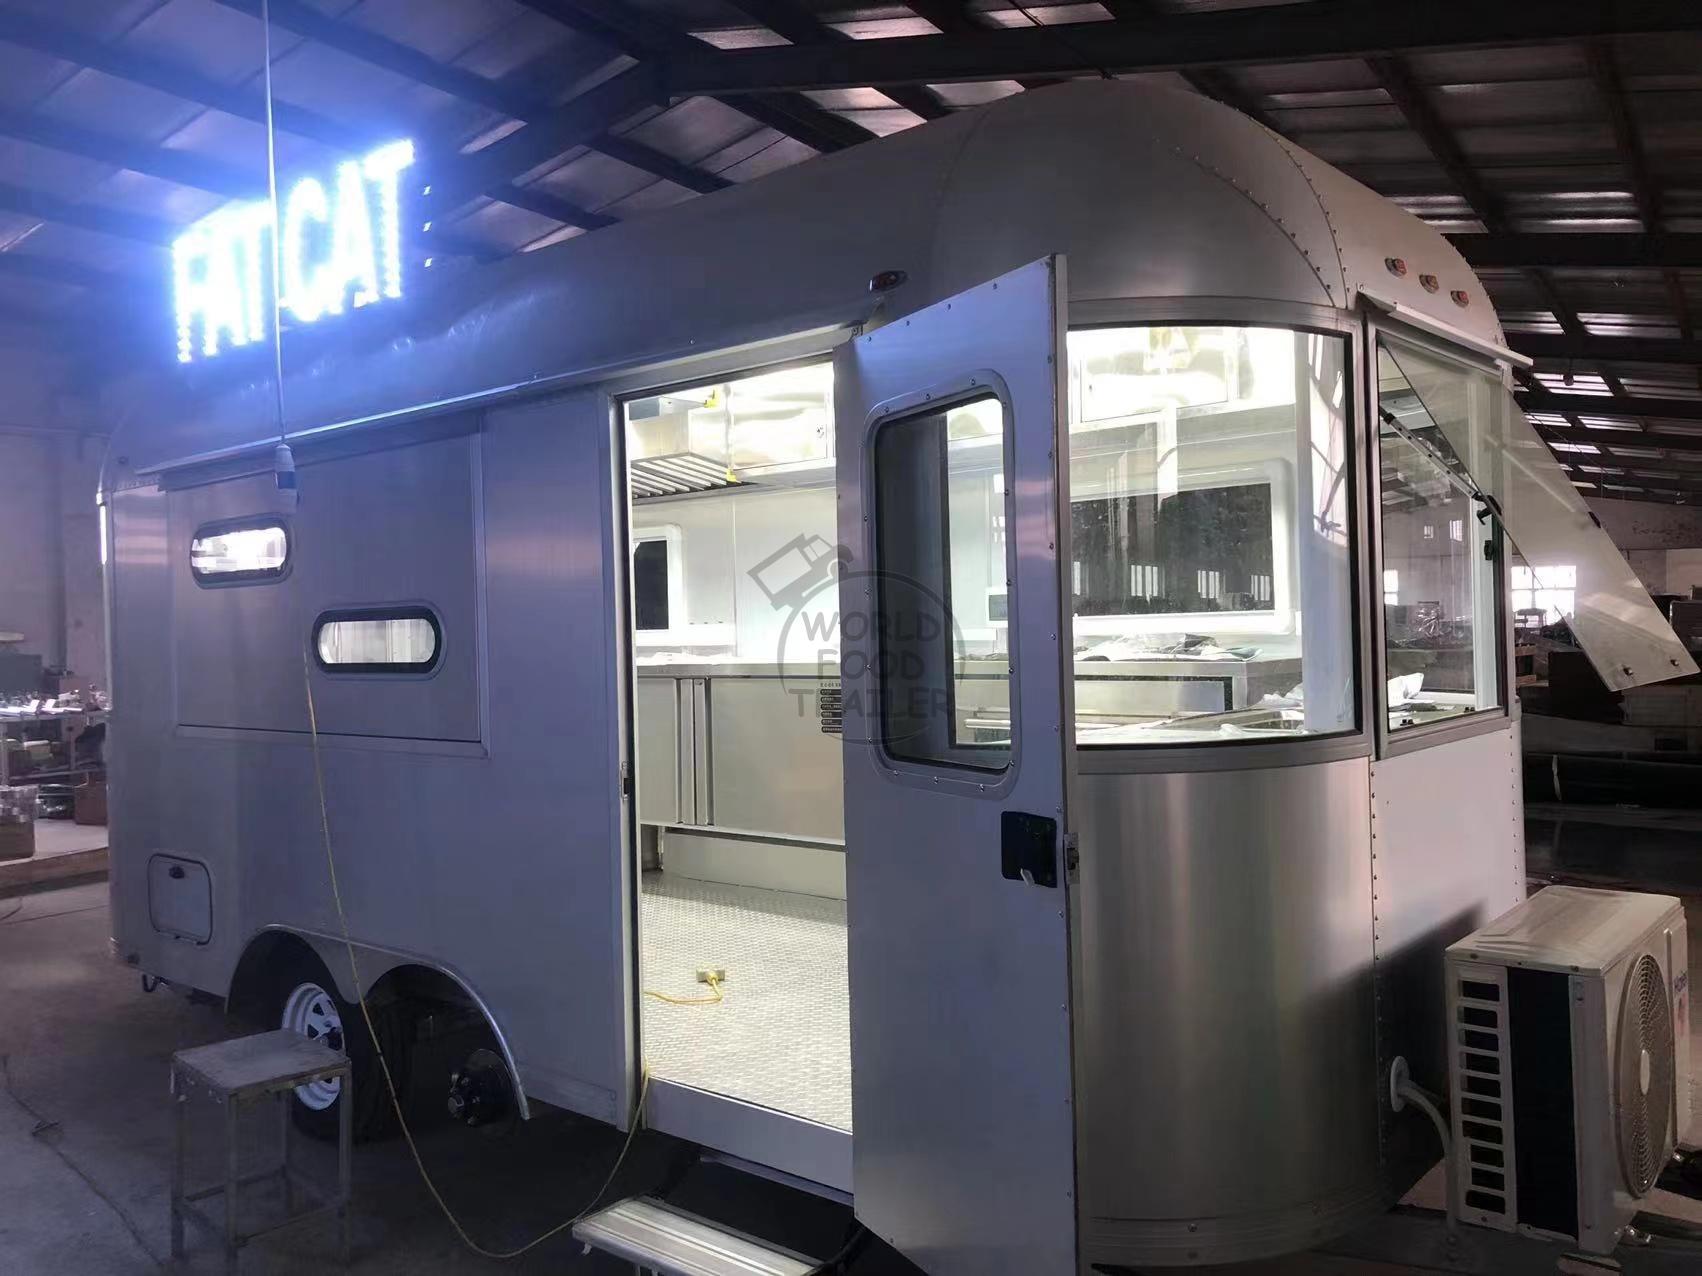 2022 Customized Airstream Food Trailer for Sale, Updated Mobile Food Vehicle